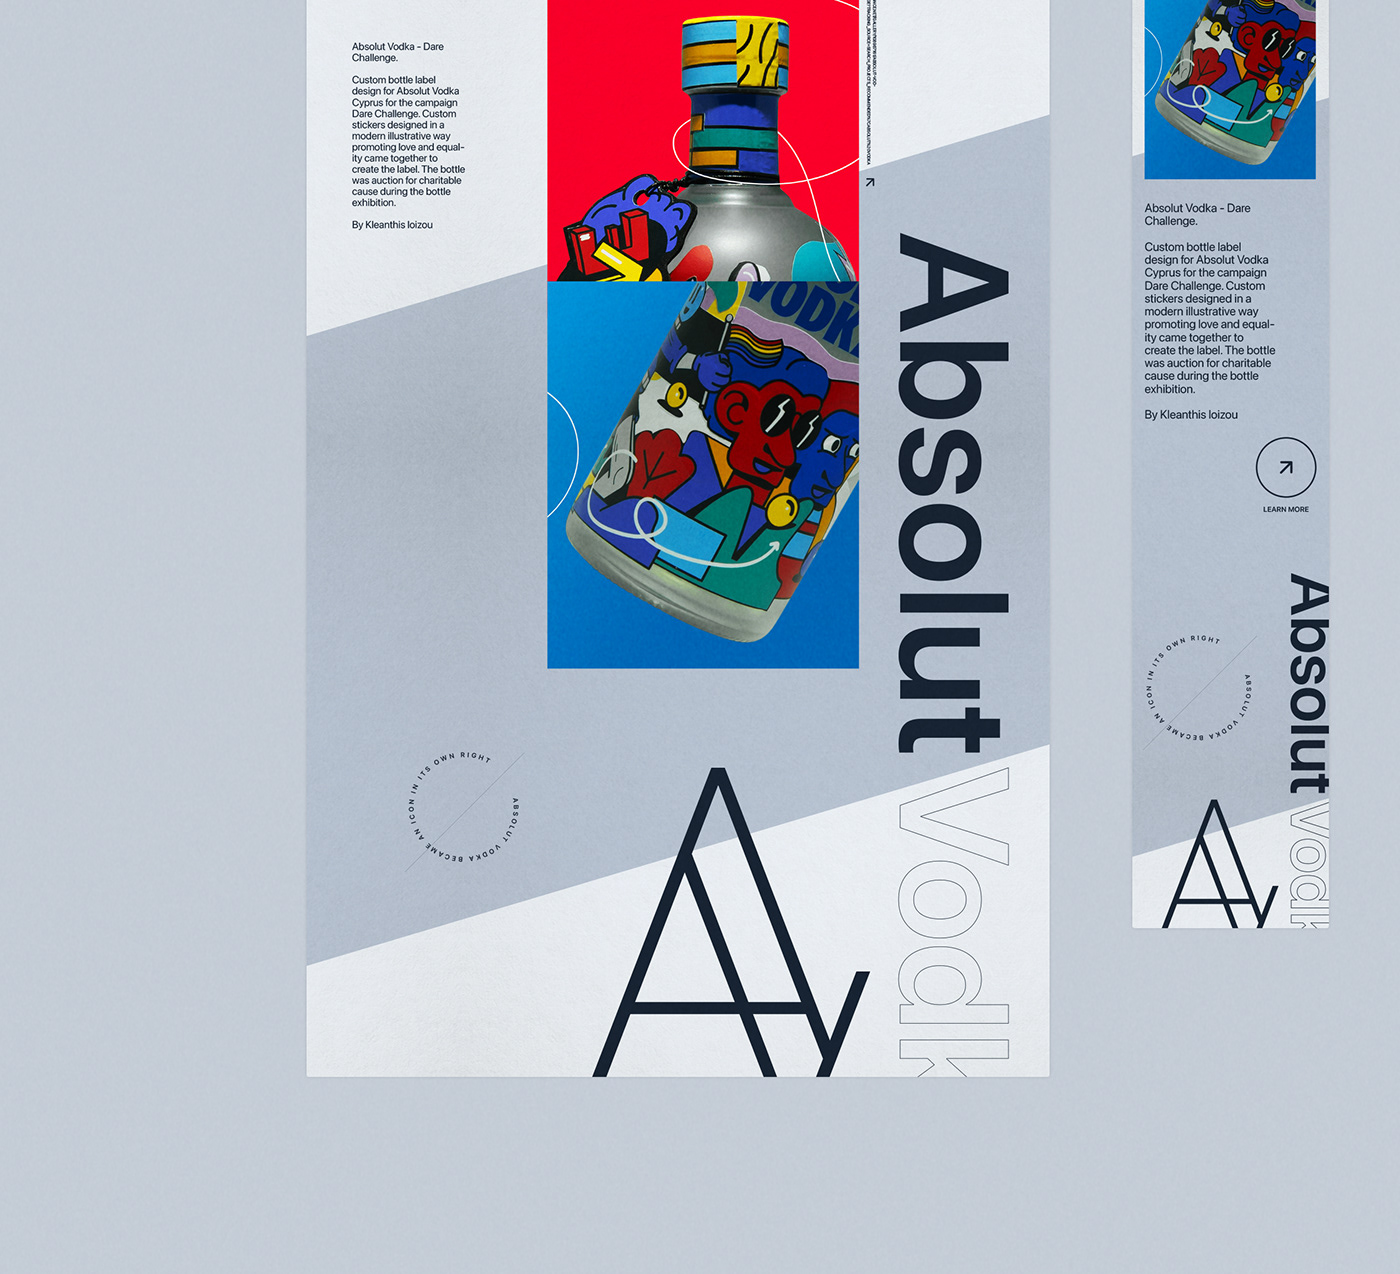 Absolut vodka website and branding redesign concept for 43 years in the market celebration